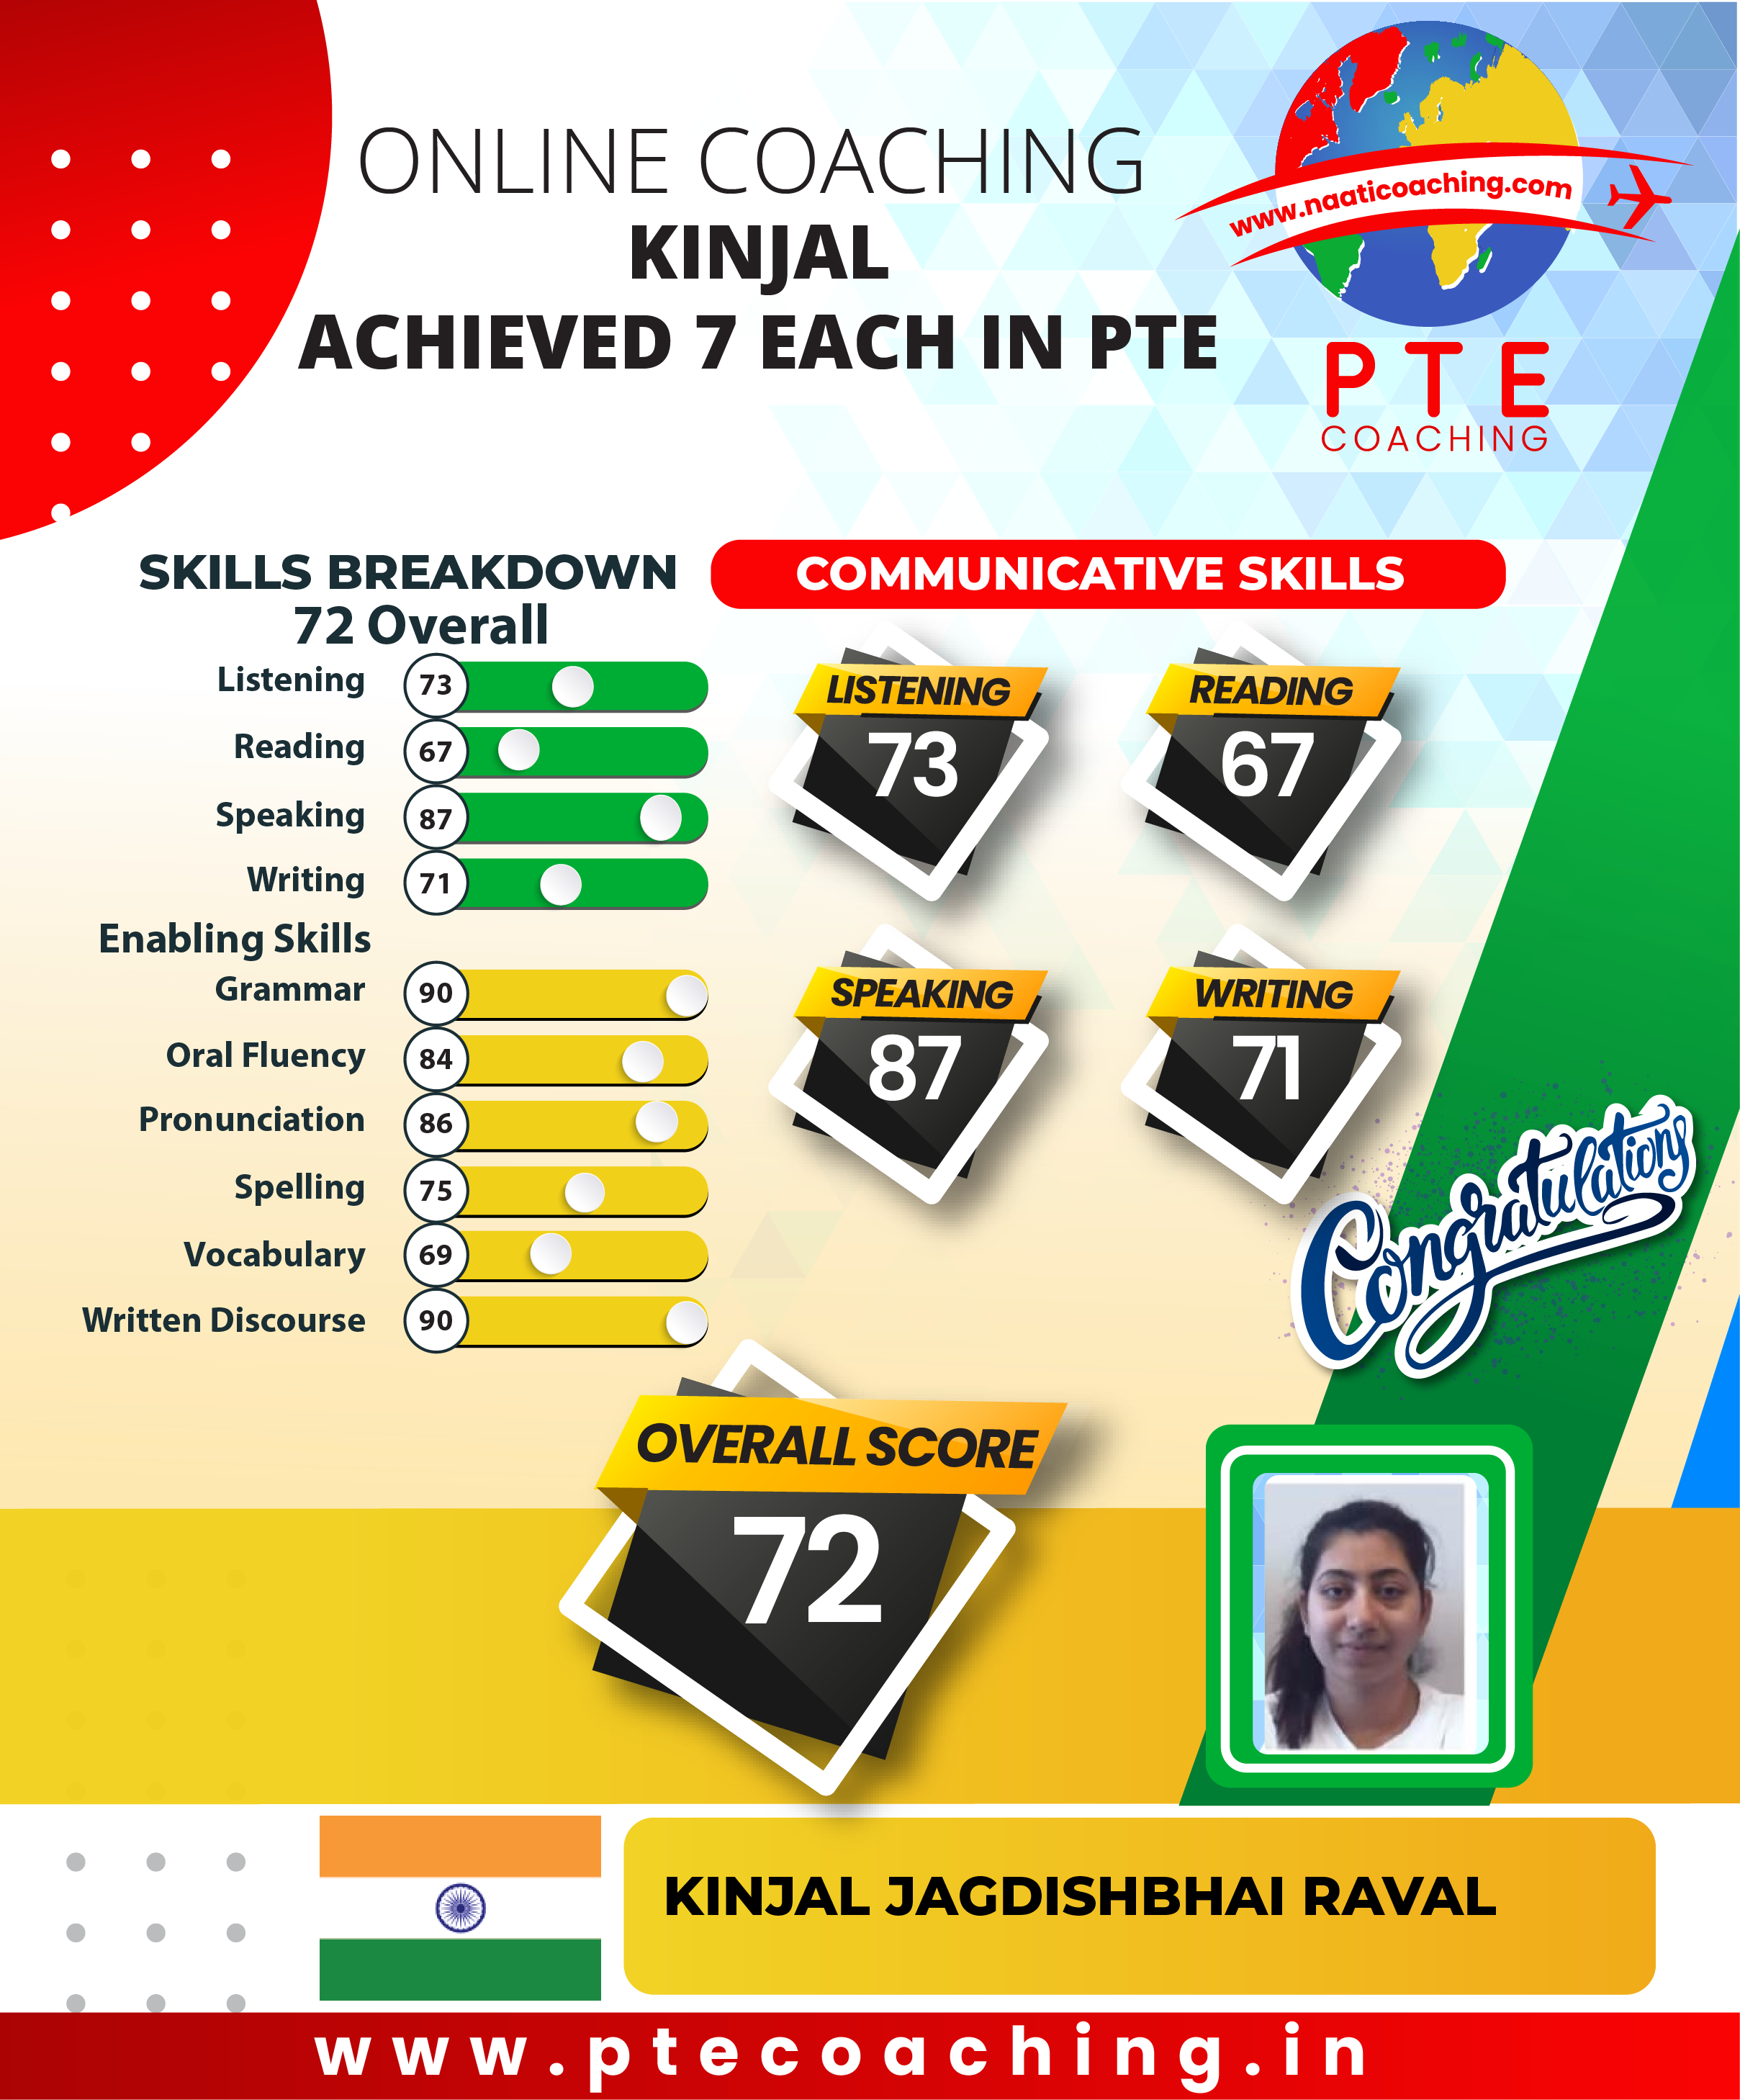 PTE Coaching Scorecard - Kinjal achieved 7 each in PTE